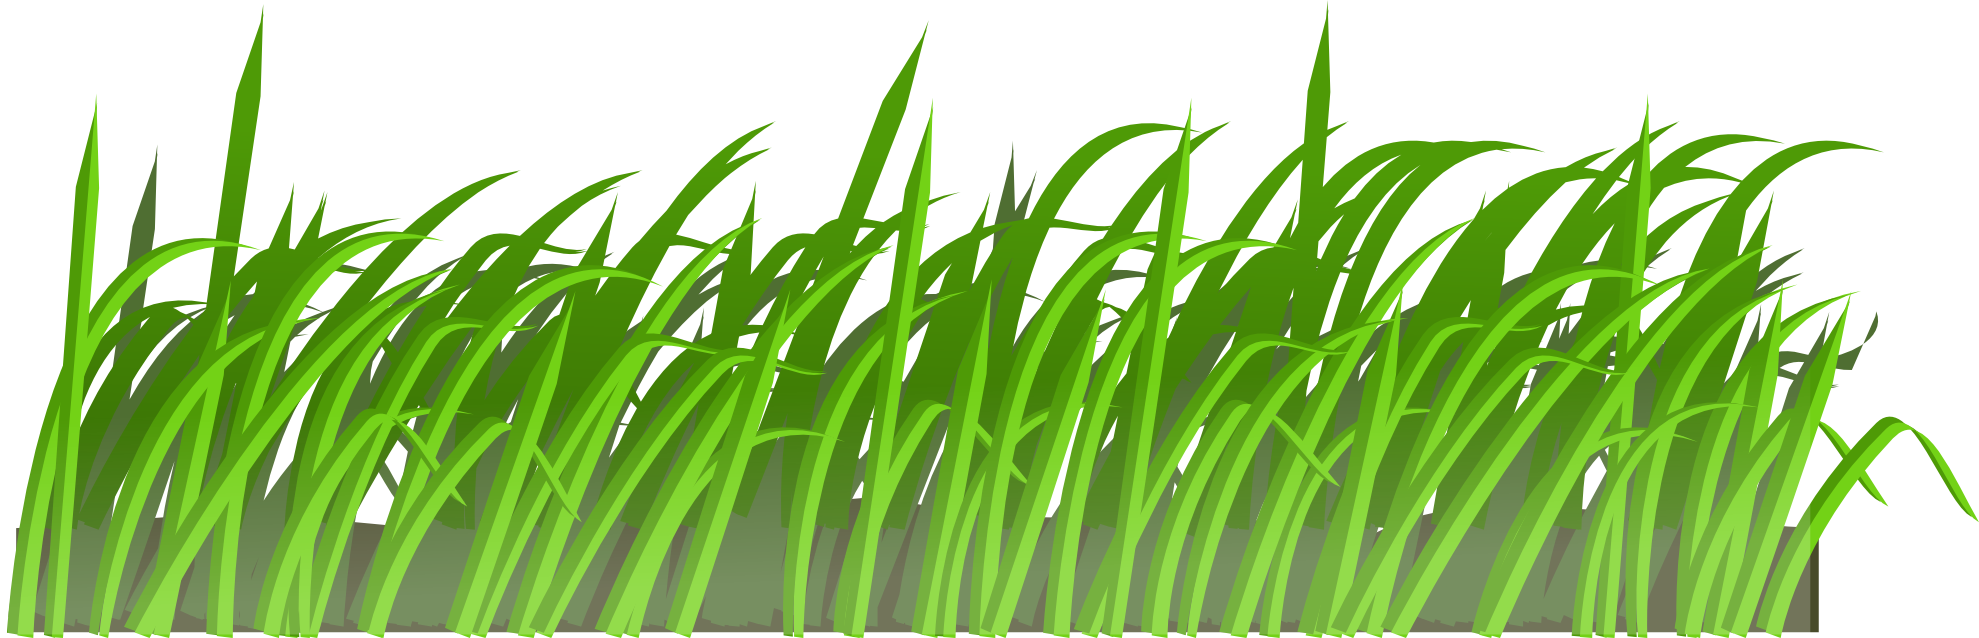 grass png images pictures #9217